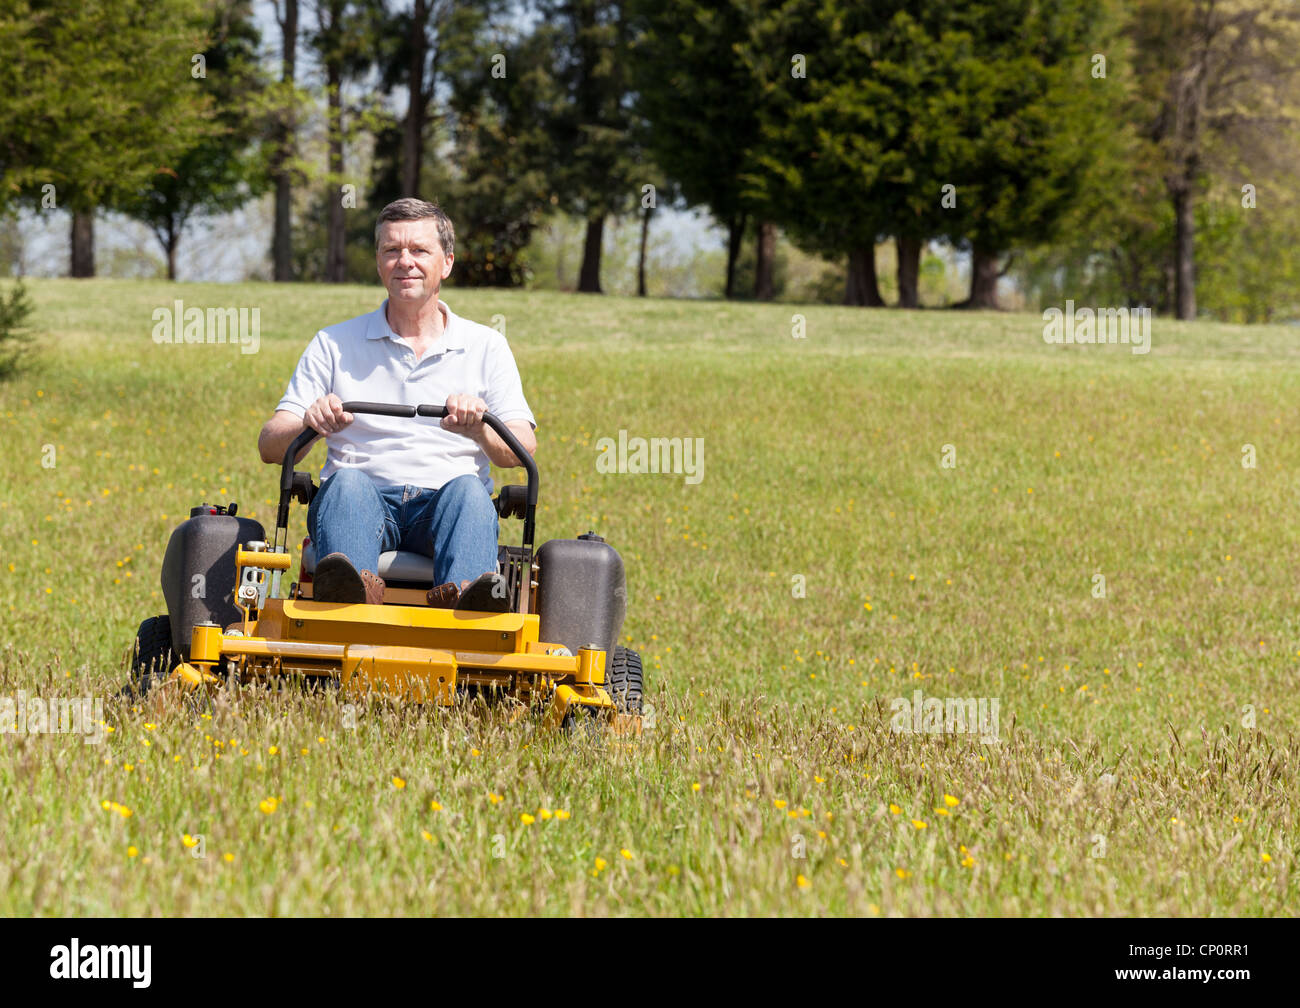 Senior retired male mowing the lawn and cutting the grass on a sit-on lawn mower Stock Photo